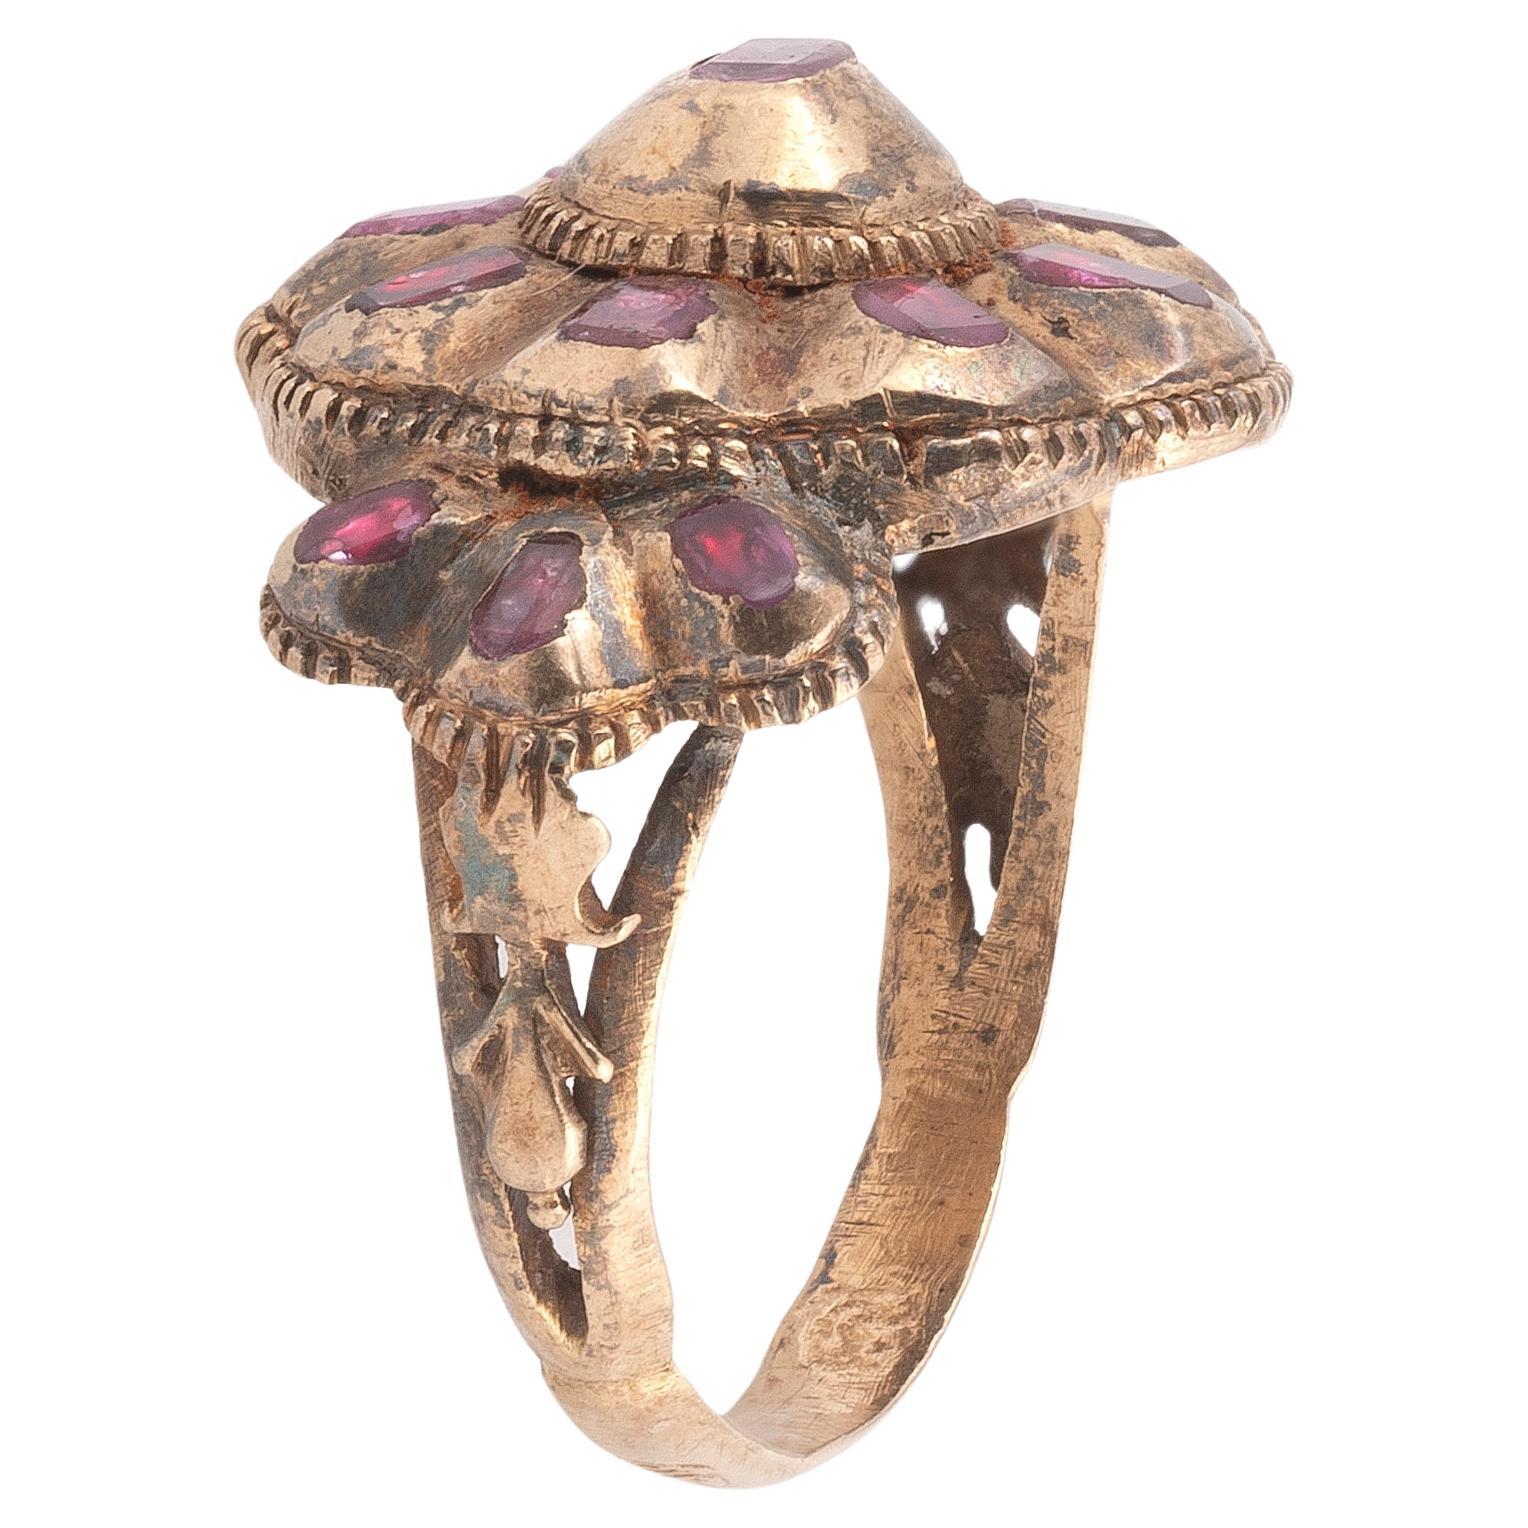 Late-1700s (Georgian era) Italian gold ring with table cut rubies in closed setting. This beautiful example is completely original, it features a lovely flower bow shape with decorated 